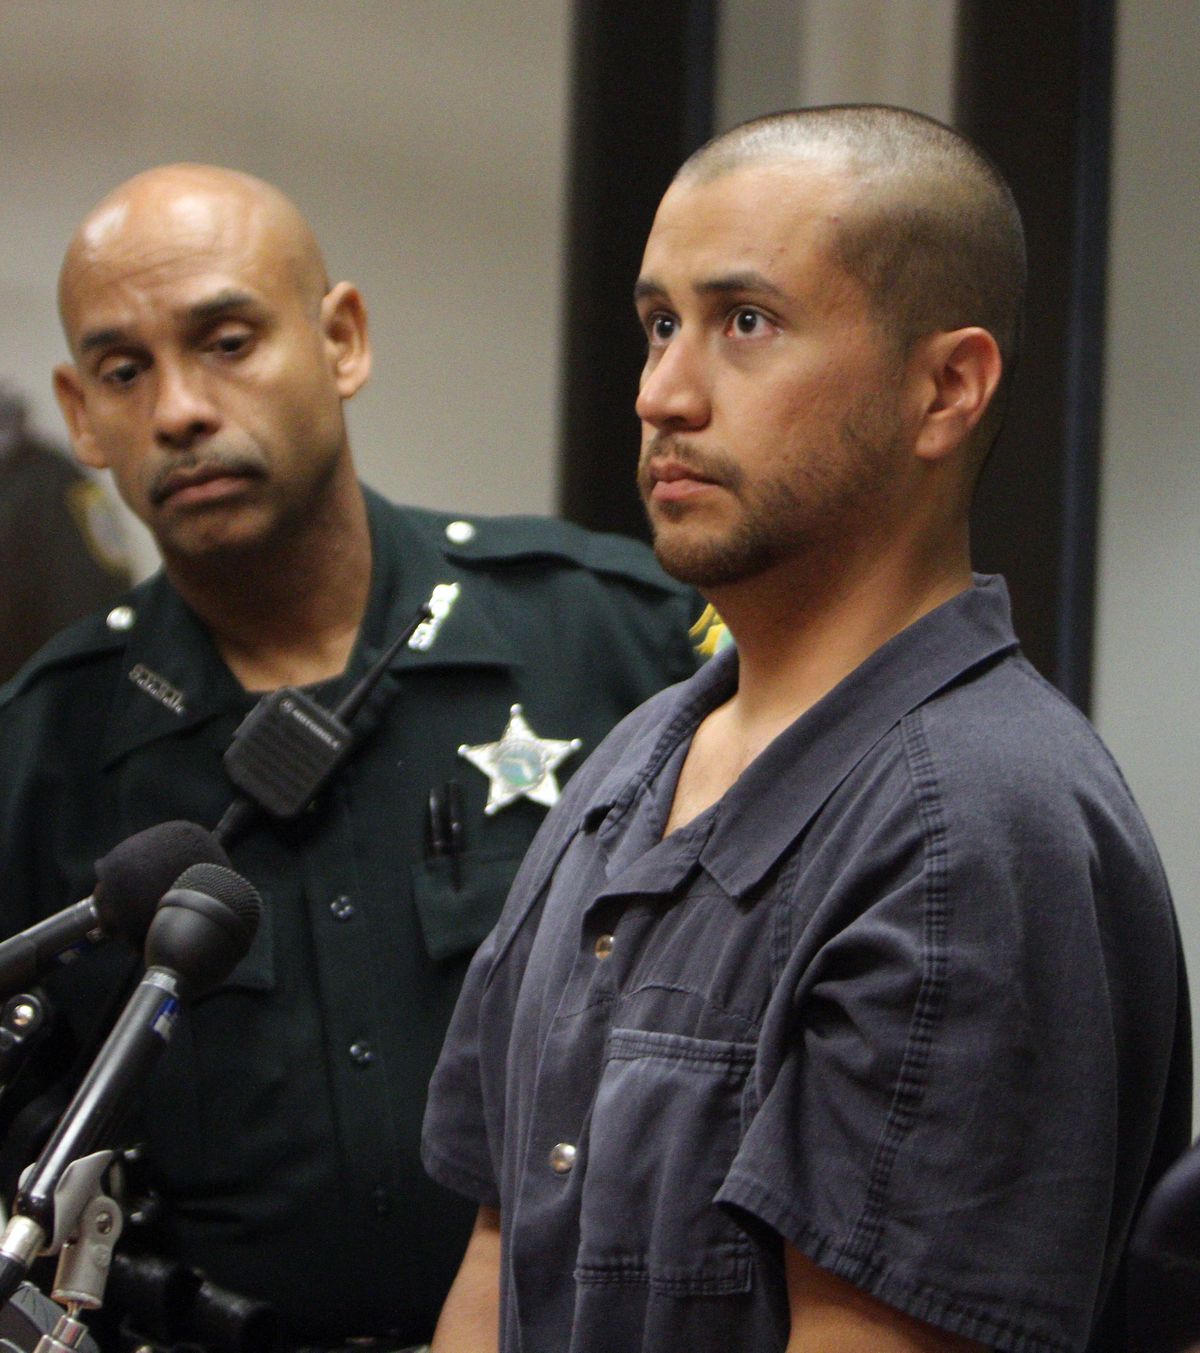 George Zimmerman, right, attends a court hearing Thursday in Sanford, Fla. (Associated Press)